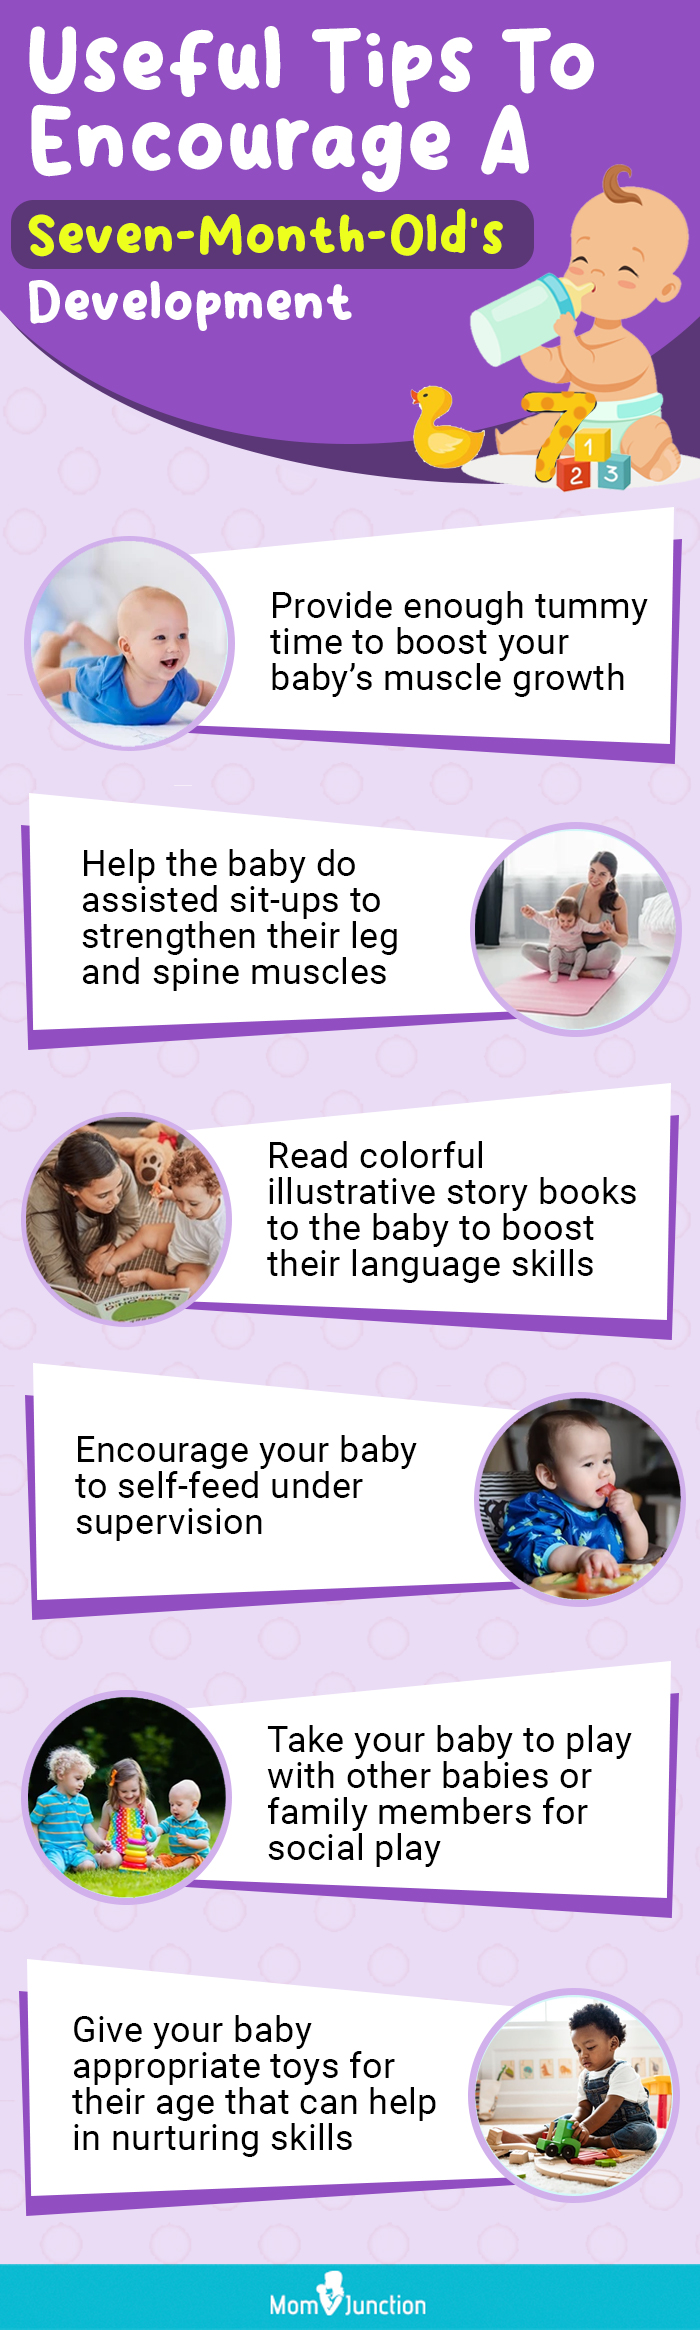 useful tips to encourage a seven month olds development (infographic)